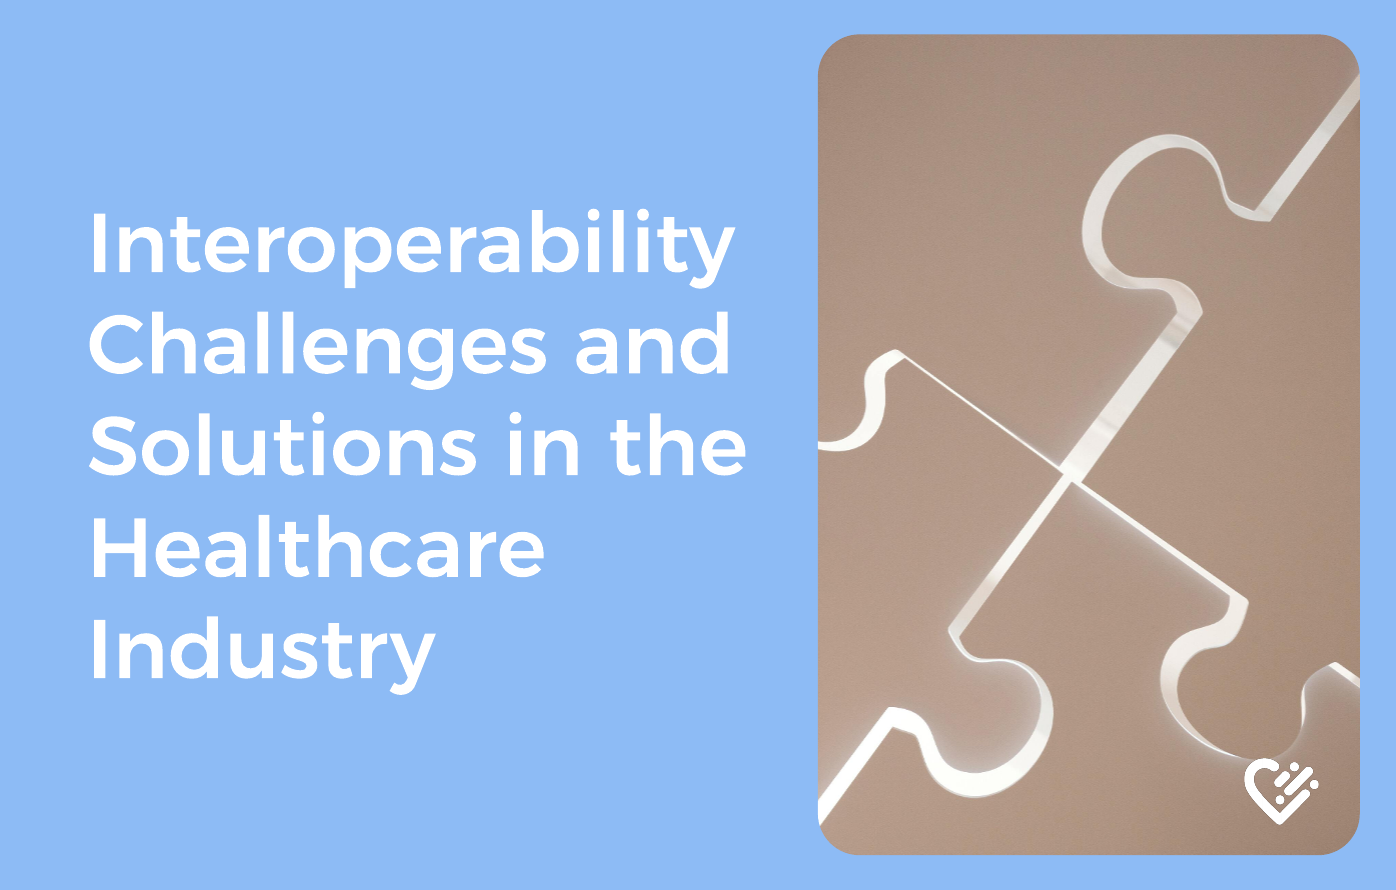 Interoperability Challenges and Solutions in the Healthcare Industry